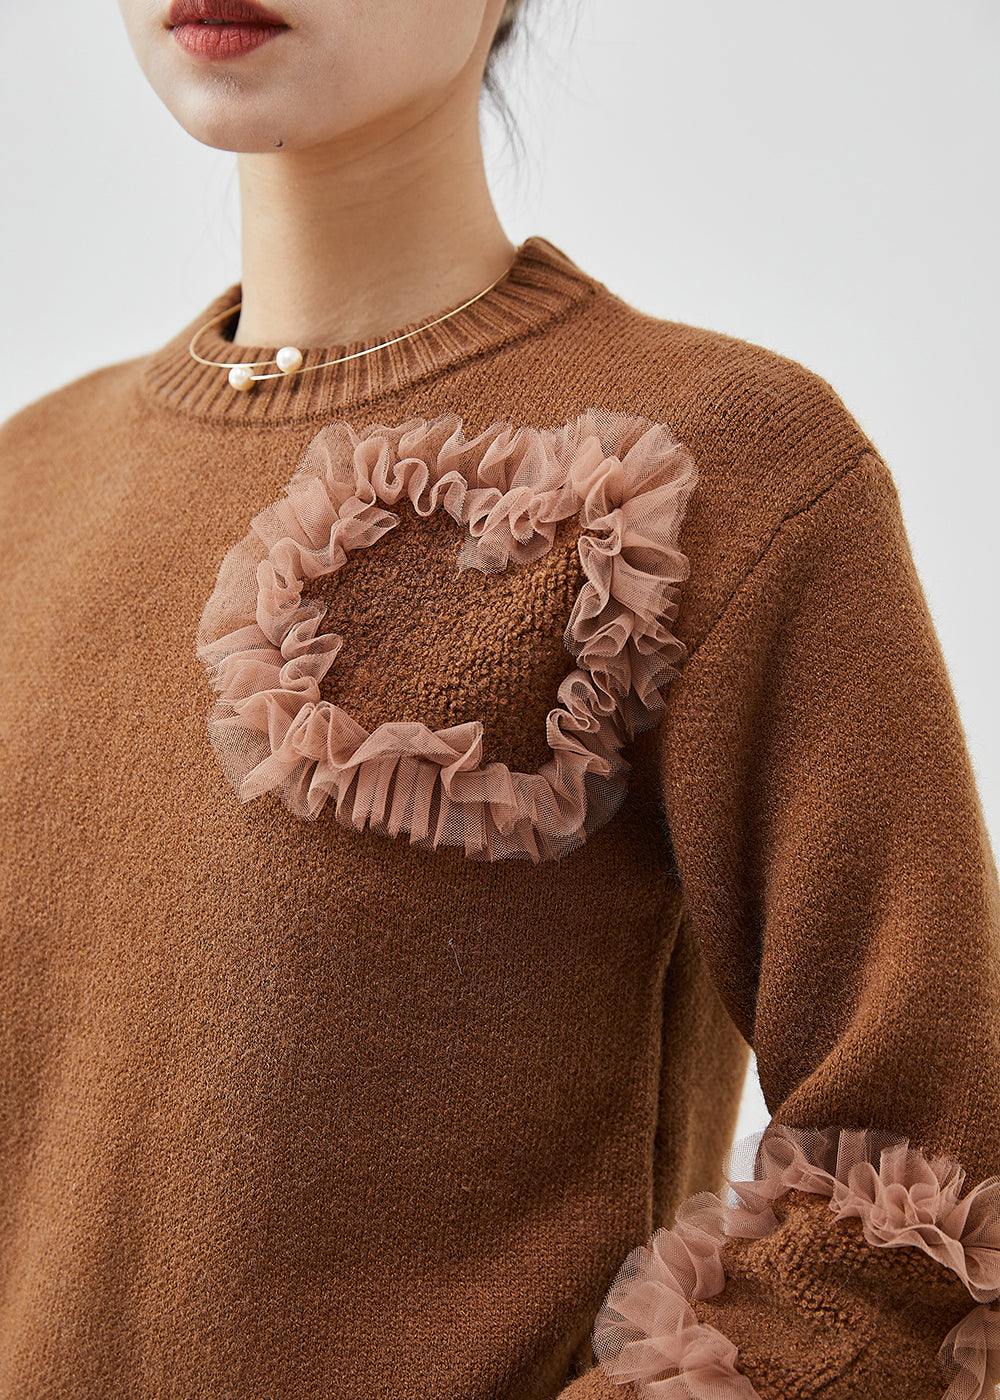 DIY Coffee Ruffled Patchwork Cozy Knit Sweater Tops Winter